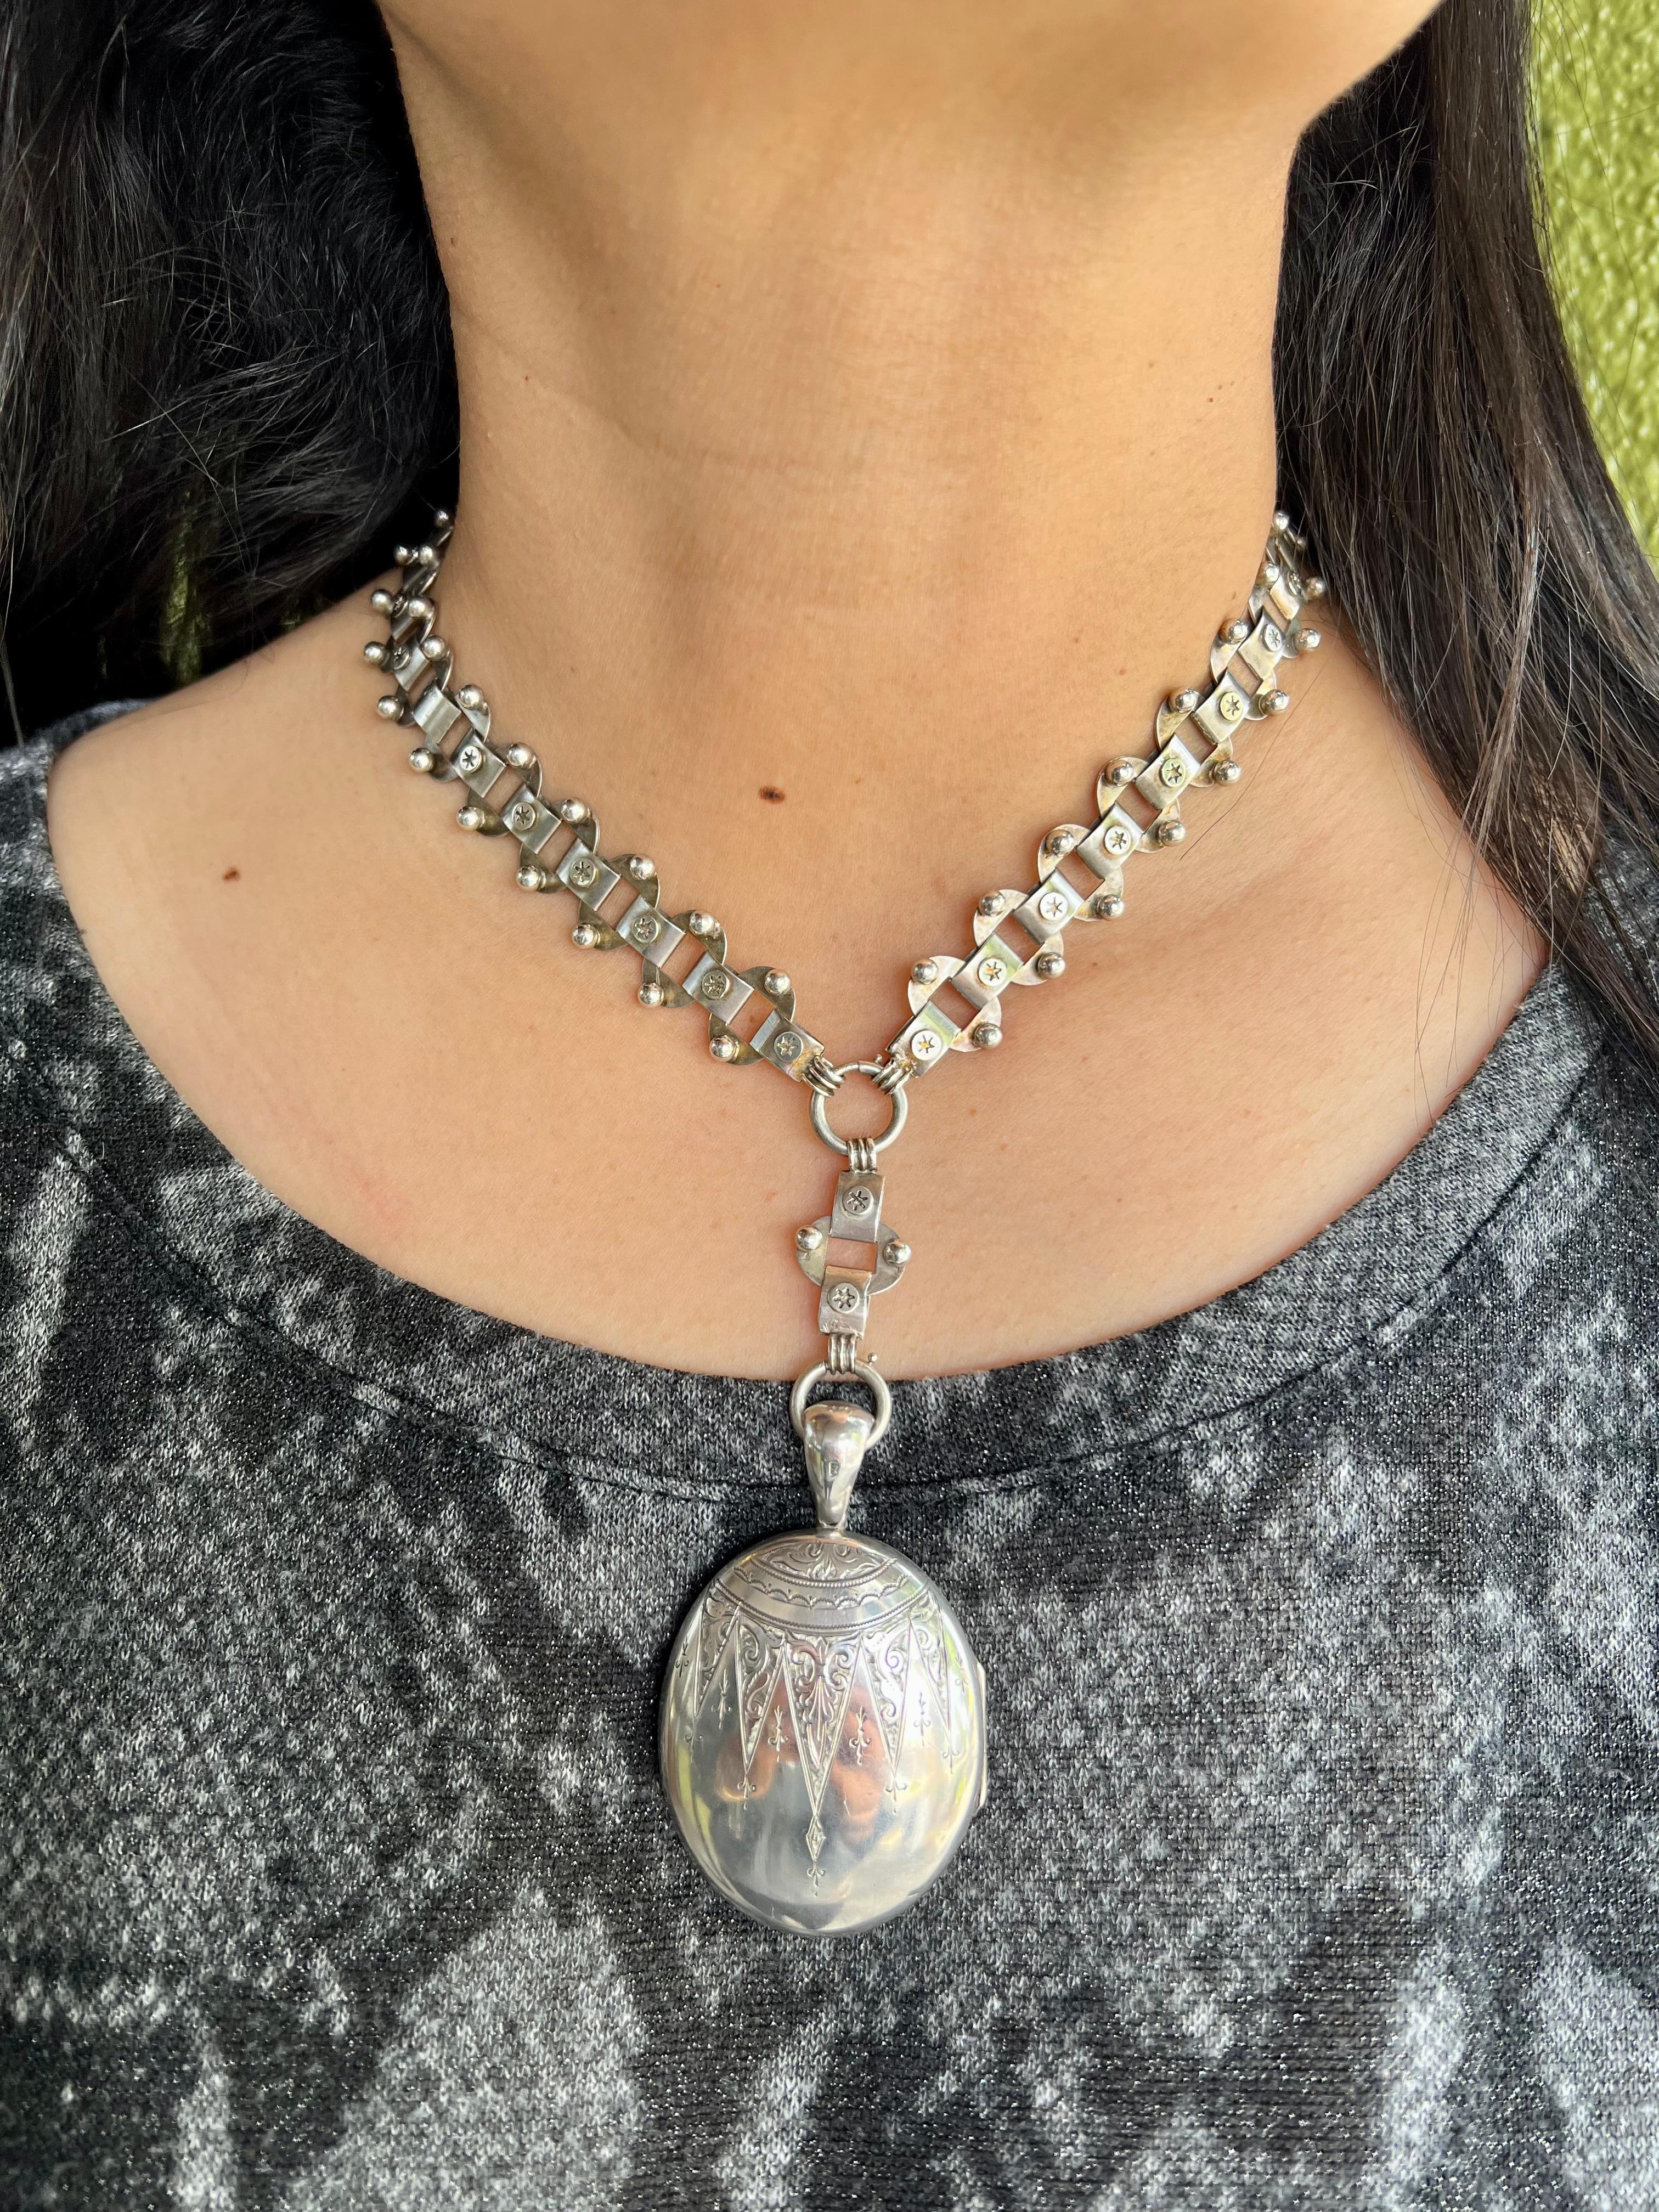 Victorian Sterling Engraved Book Chain Locket Necklace Birmingham c. 1880 In Excellent Condition For Sale In Berkeley, CA